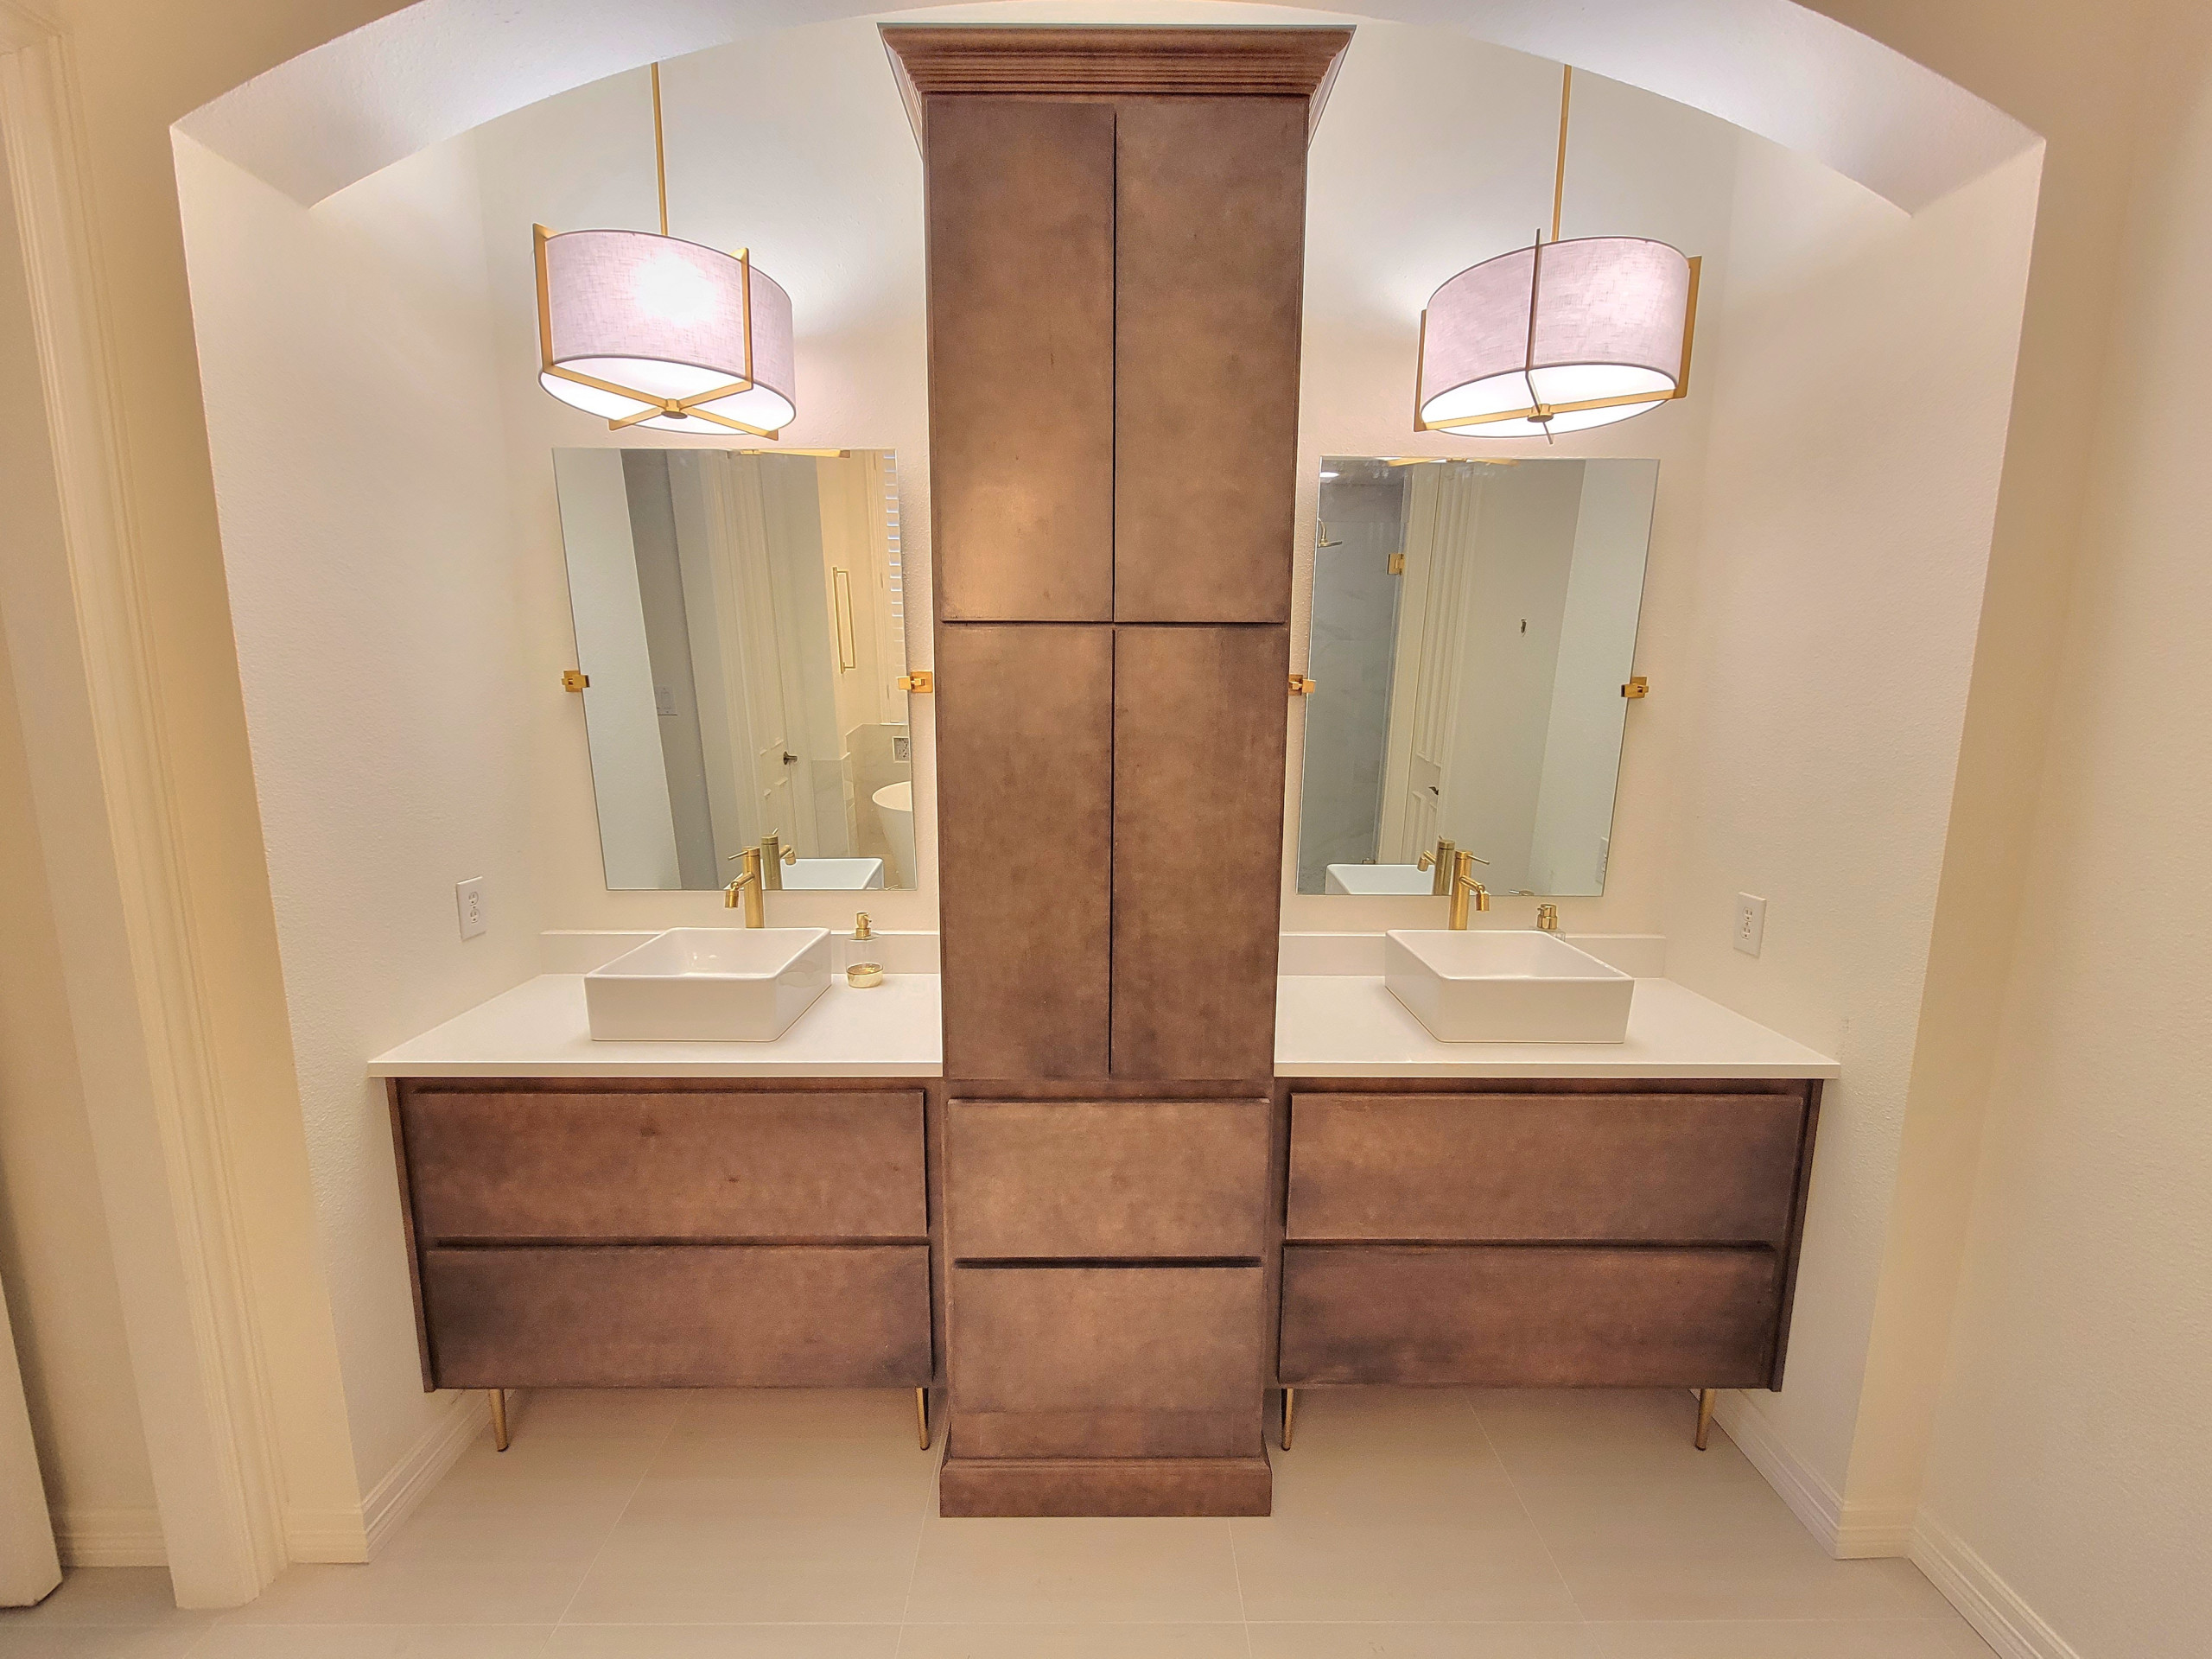 Stacey - Full Master Bathroom remodeling Frisco TX